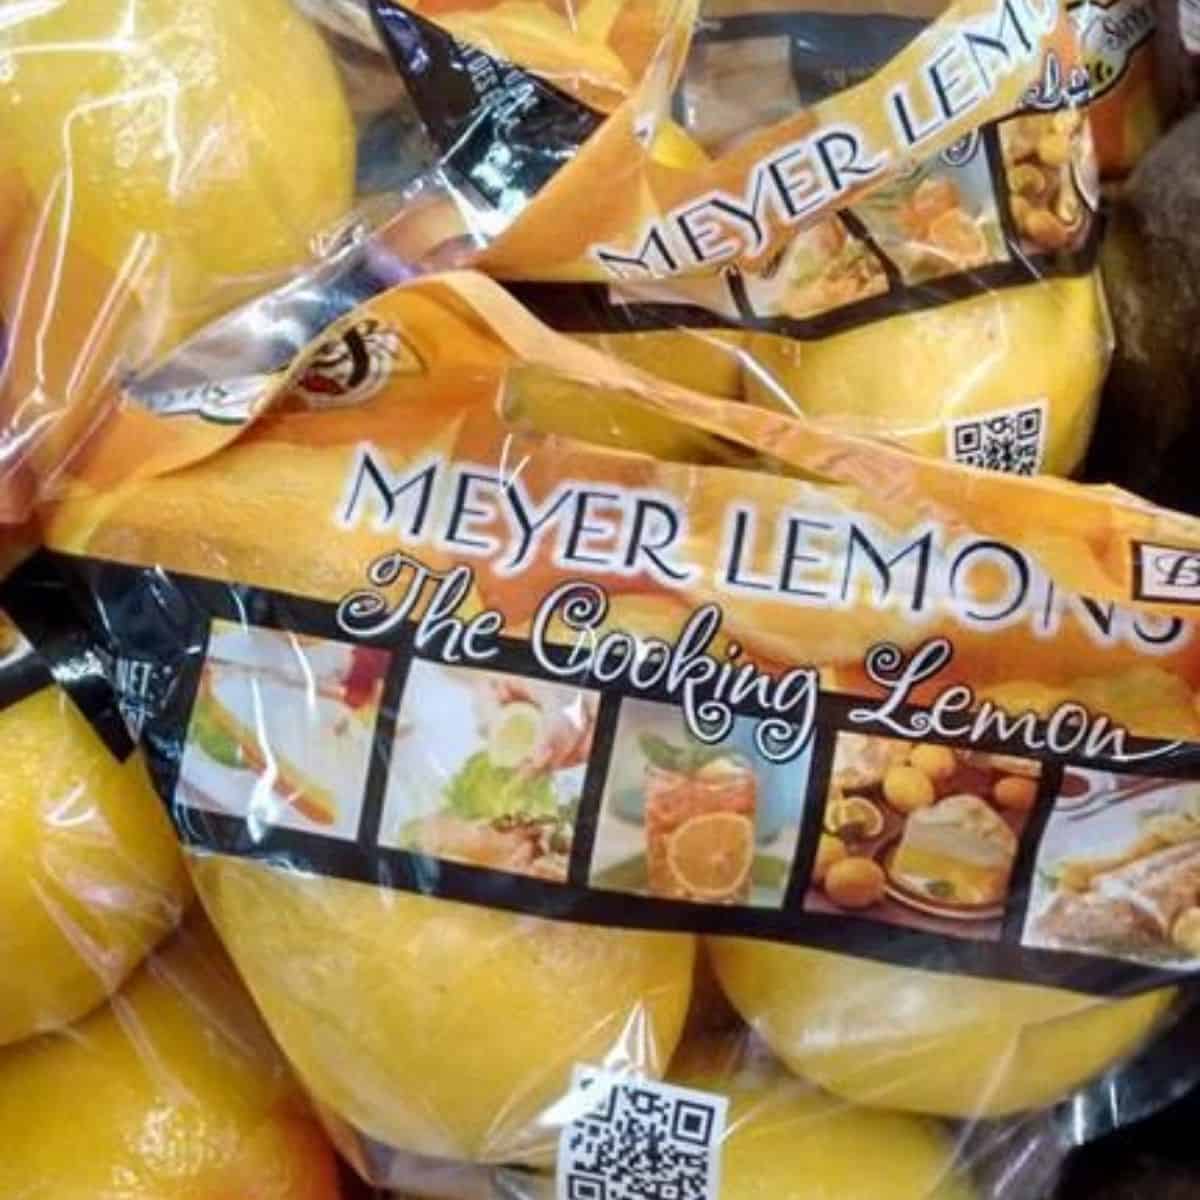 Bags of Meyer Lemons on display at a grocery store.